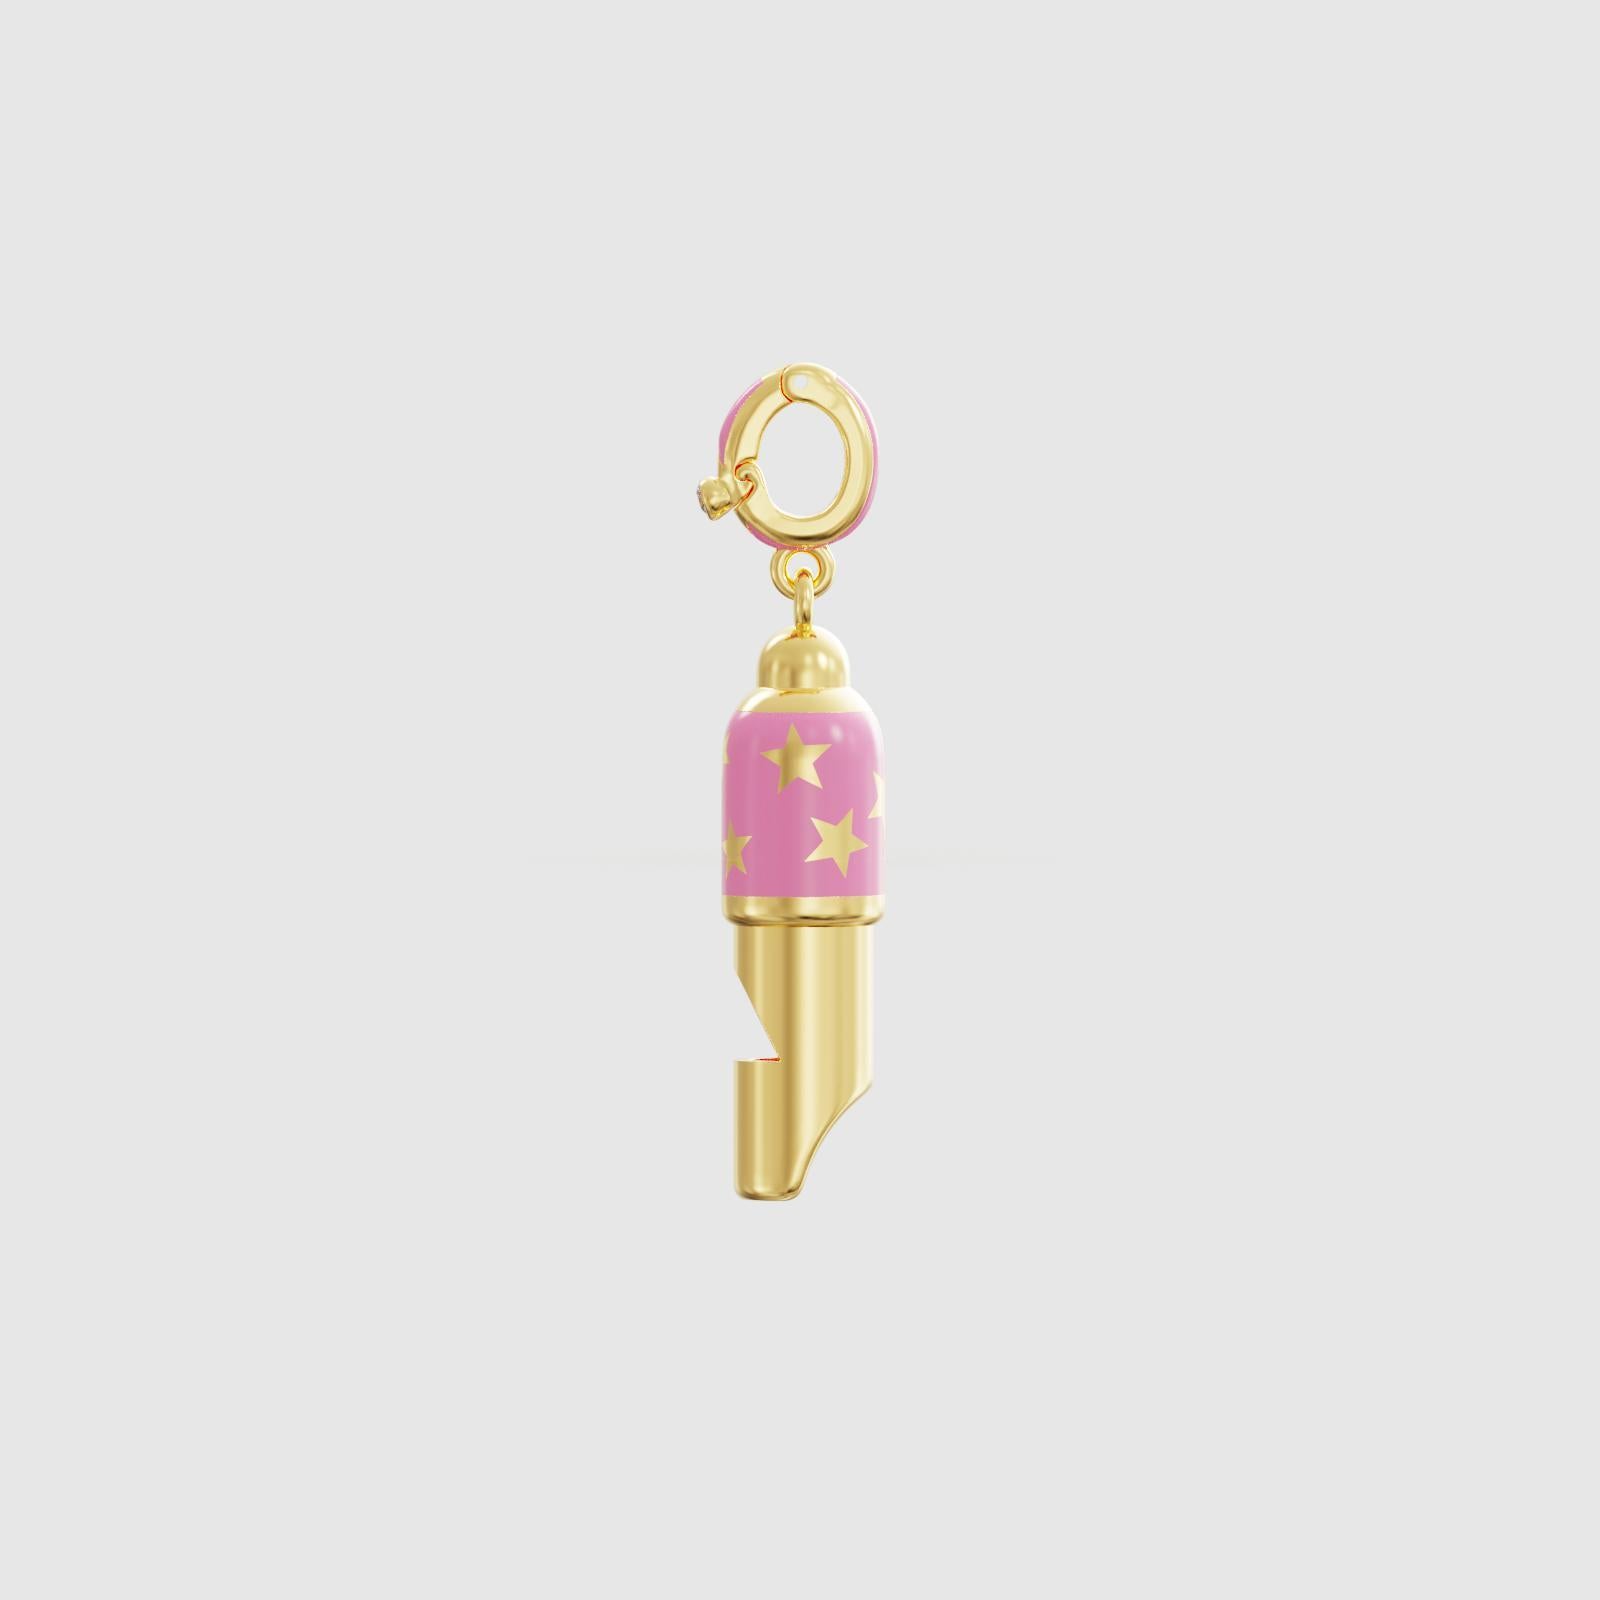 Modern Small Gold Whistle Pendant Necklace, Pink Enamel